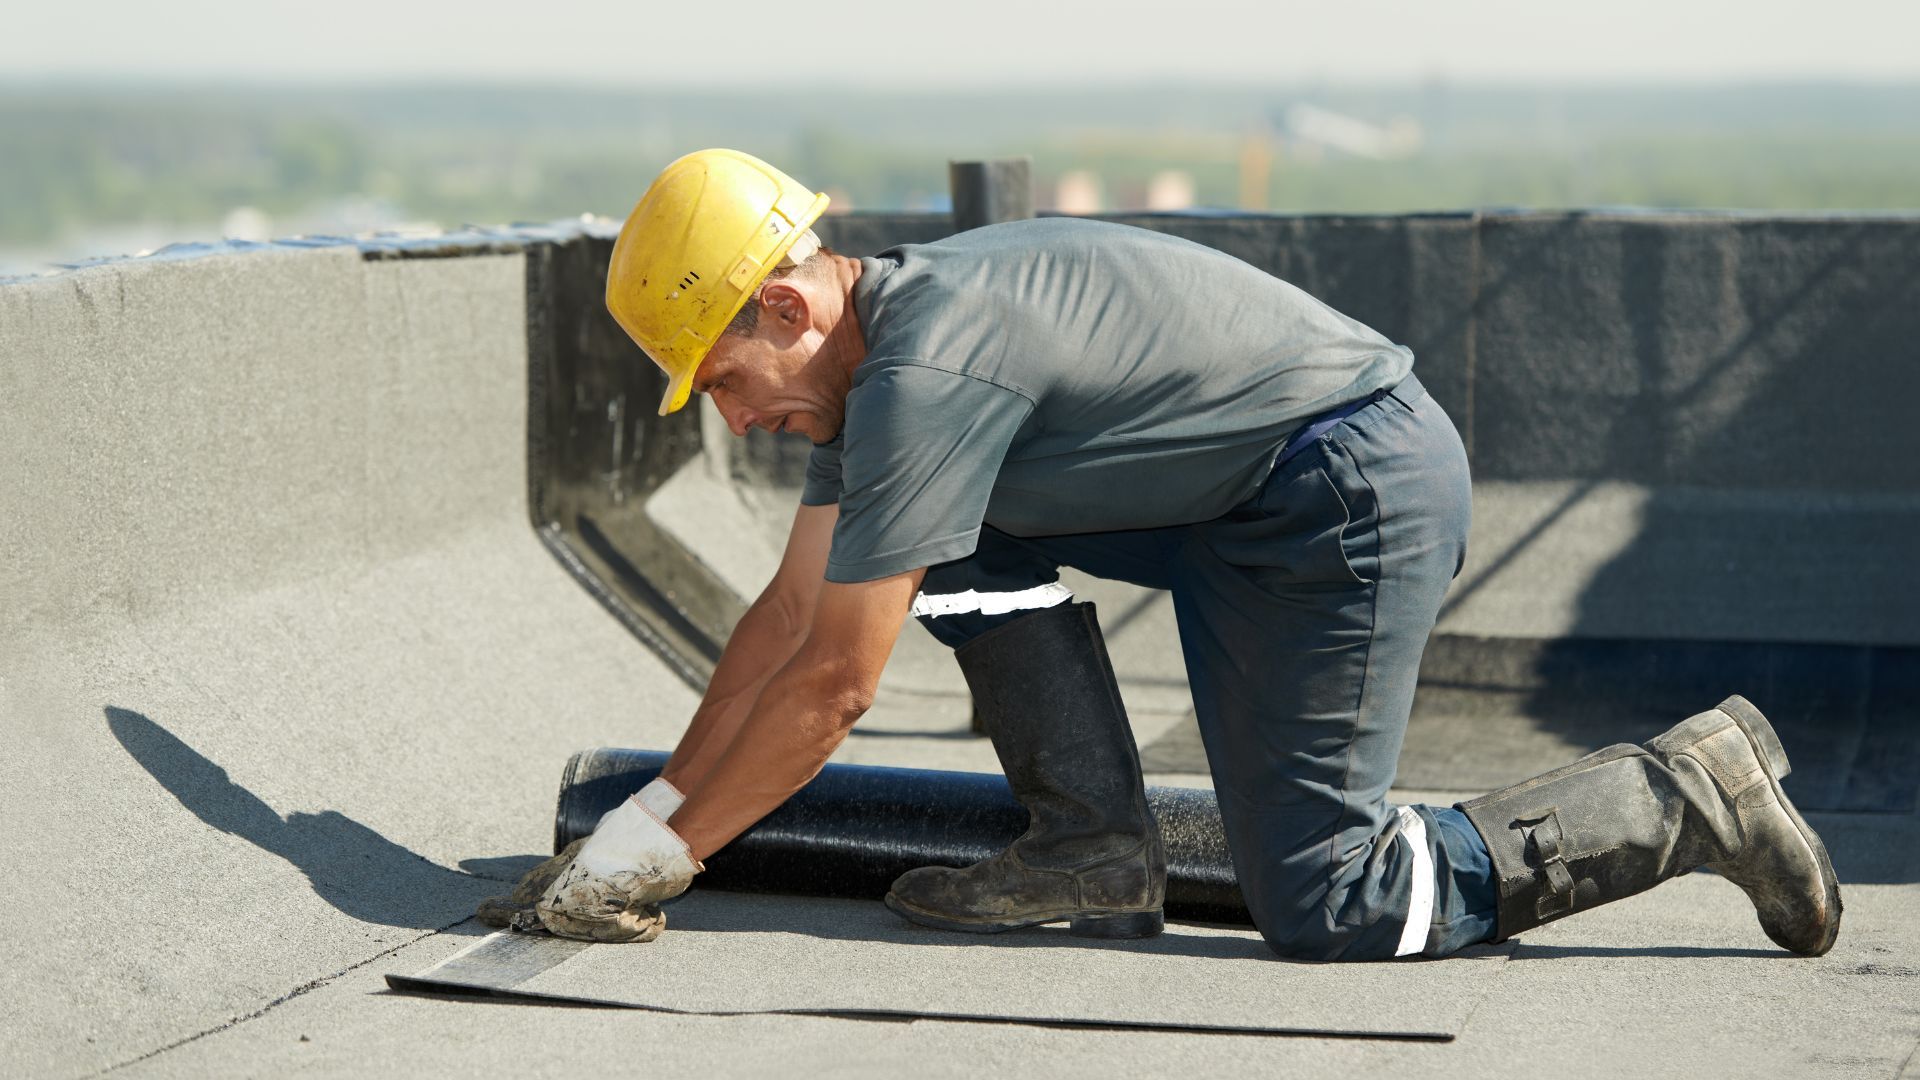 View of commercial roofer